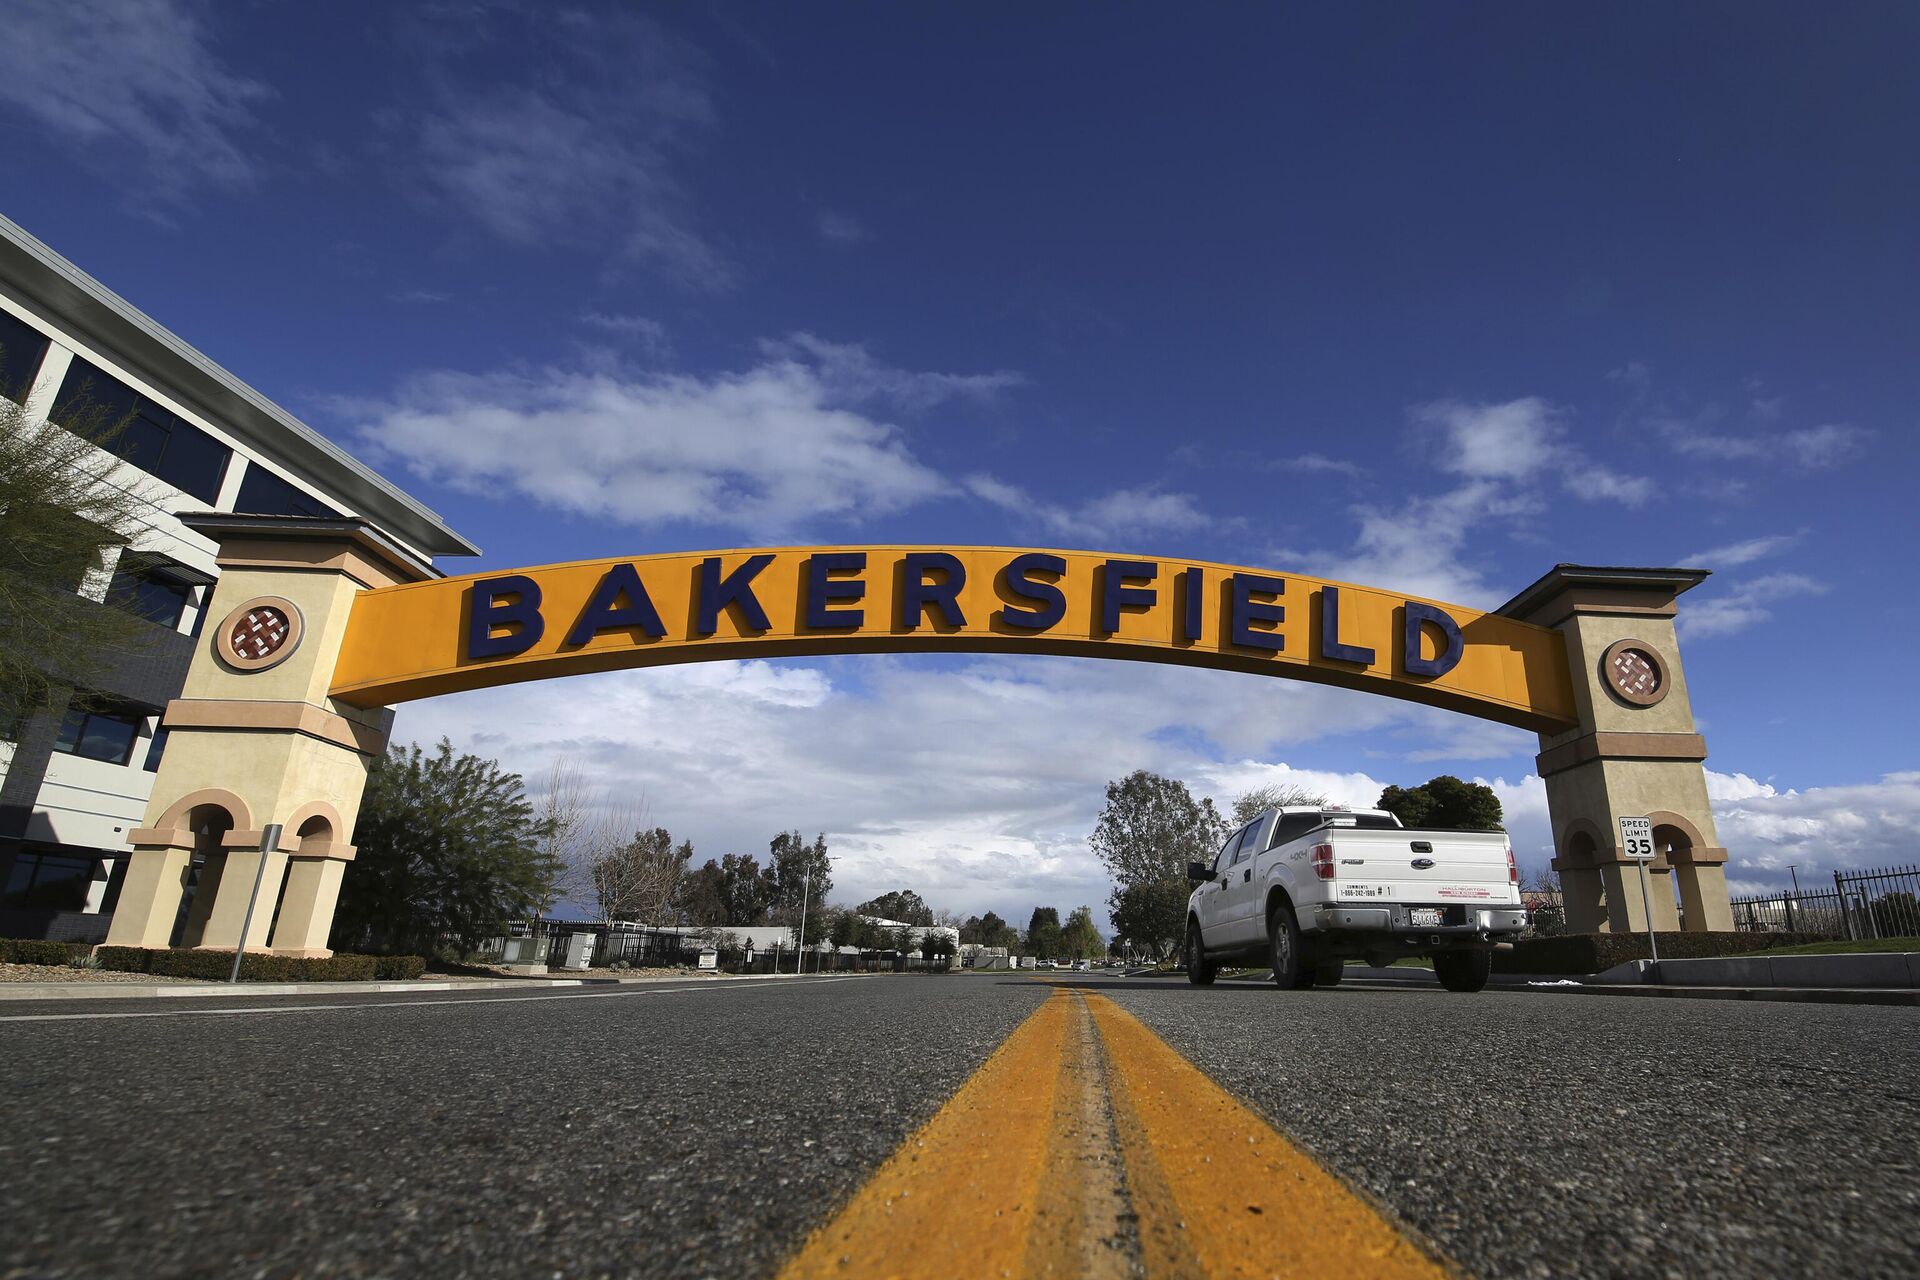 The entry sign off Buck Owens Boulevard shown in Bakersfield, Calif., where US House Speaker-elect Kevin McCarthy is a 4th generation resident for the 23rd district. - Sputnik International, 1920, 07.01.2023